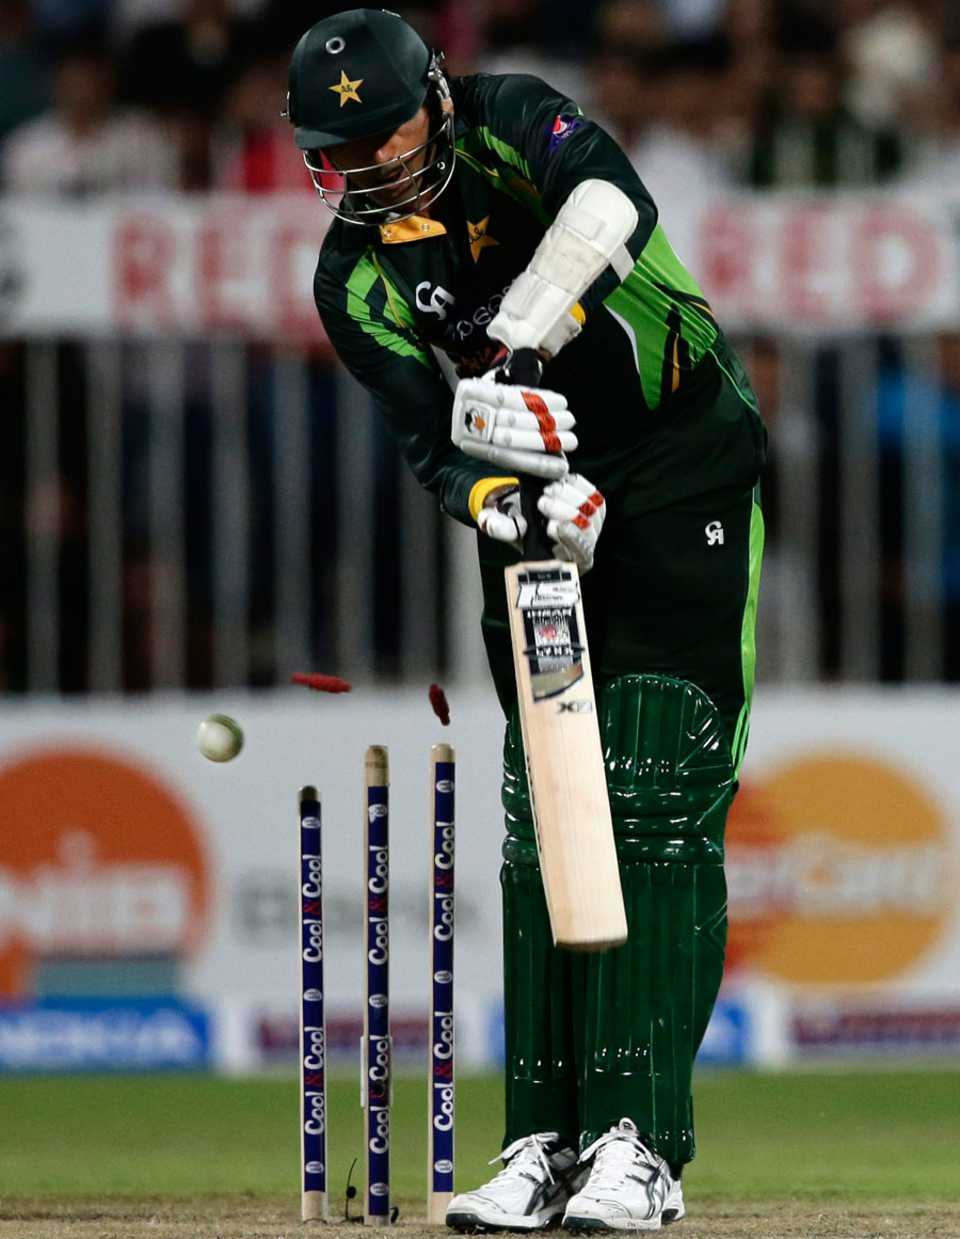 Mohammad Irfan was the last wicket to fall, Pakistan v South Africa, 1st ODI, Sharjah, October 30, 2013